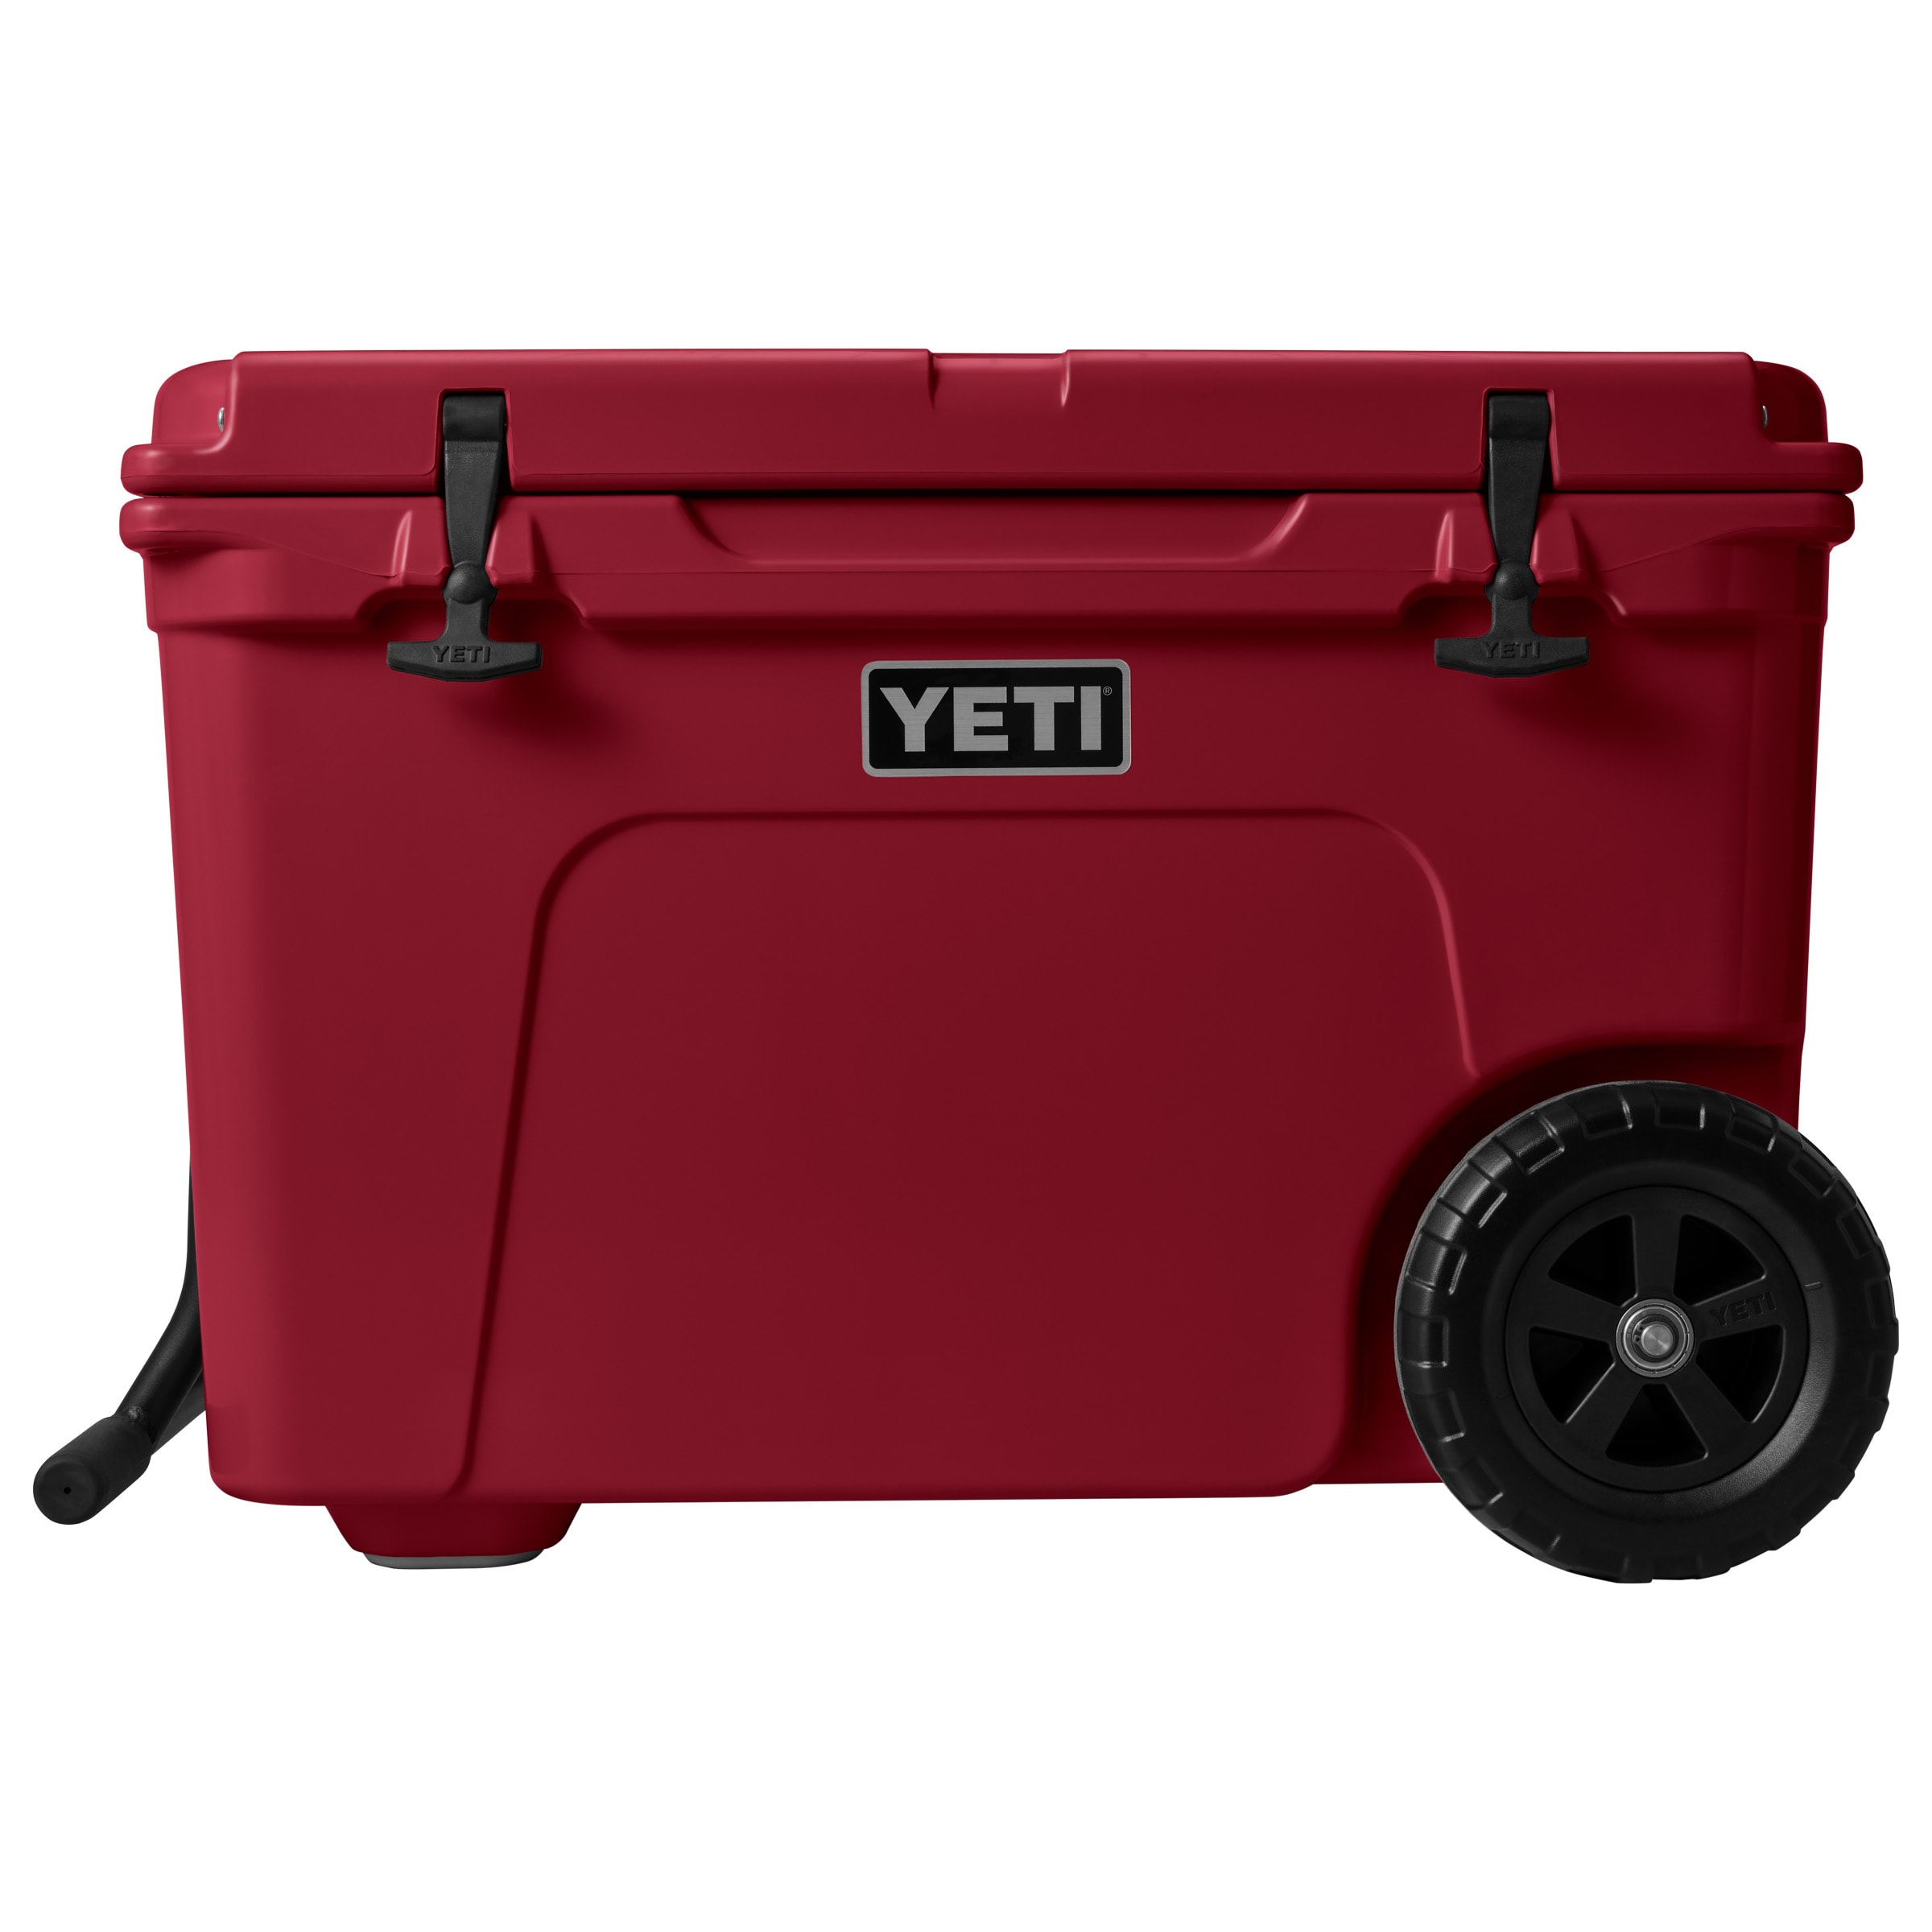 Review and Test: Rambler X2 All-Terrain Wheels for Yeti Tundra Coolers! 